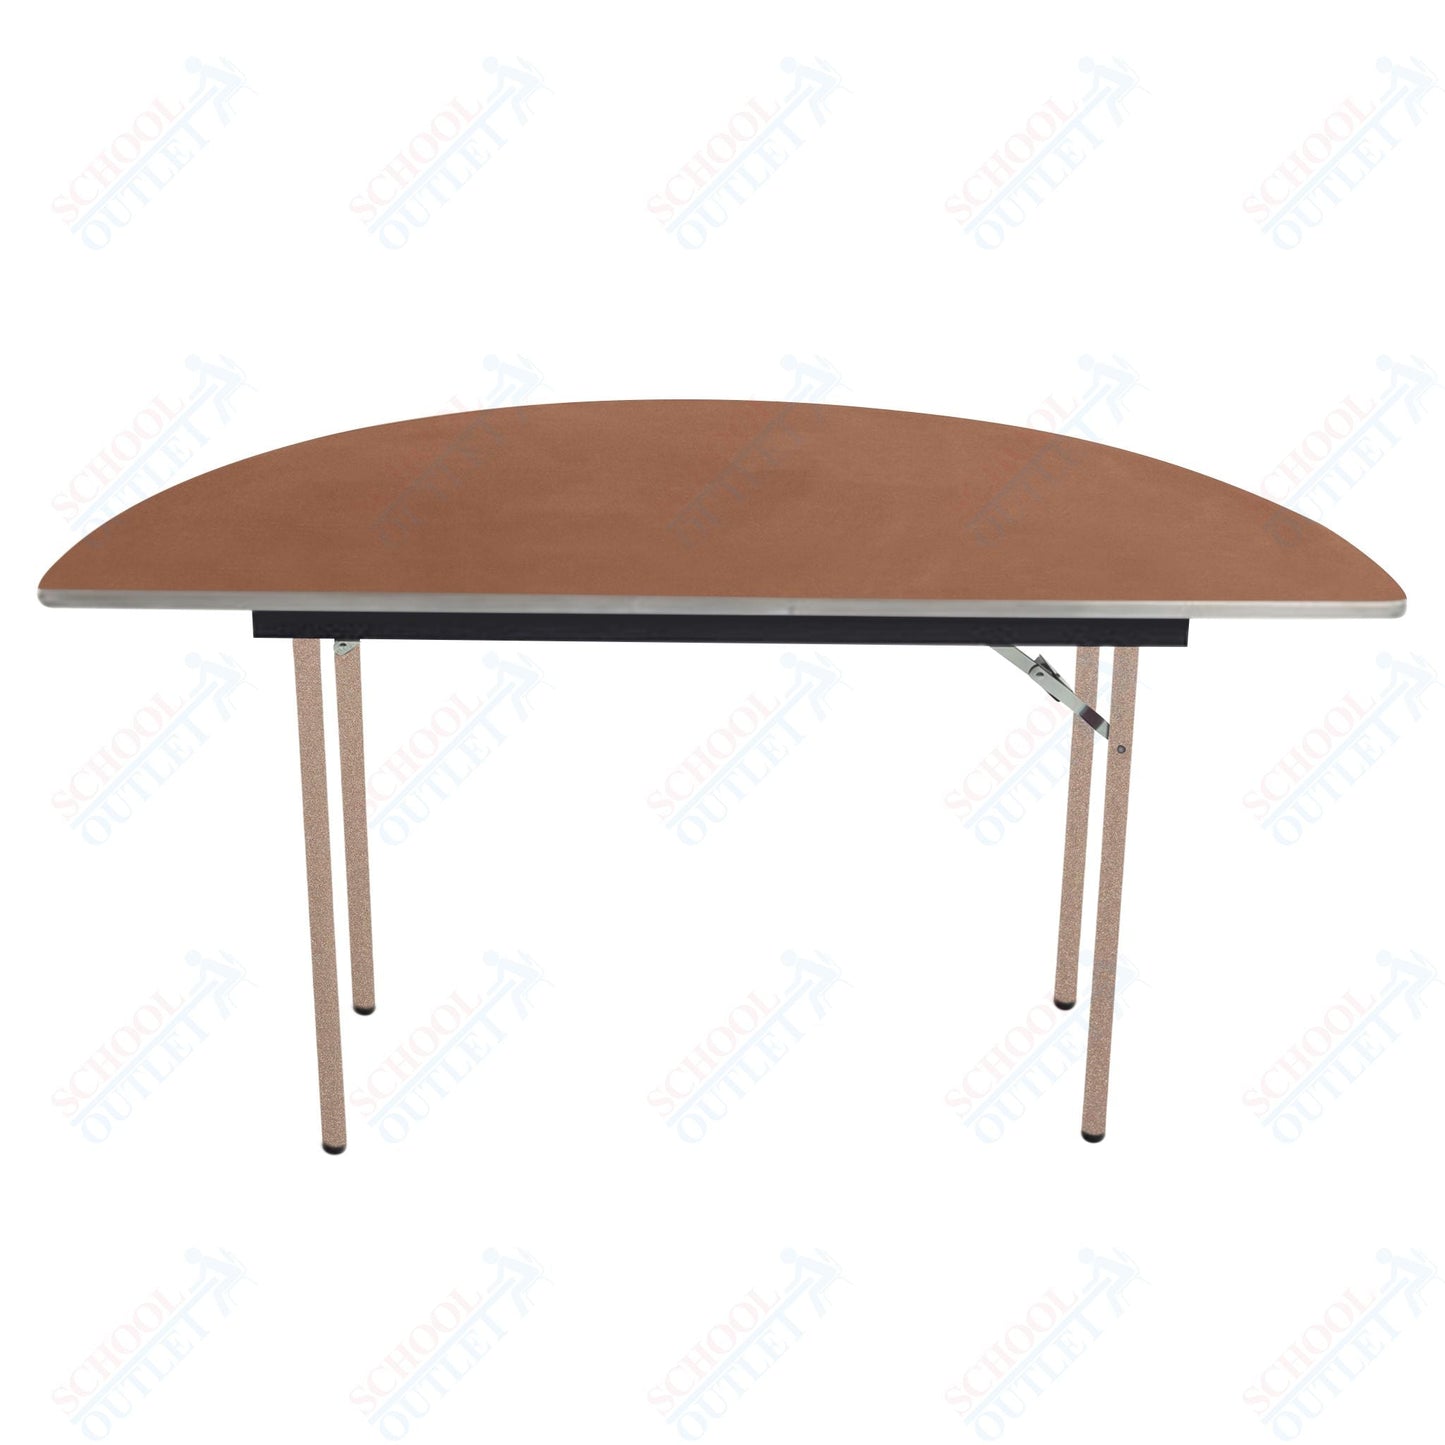 AmTab Folding Table - Plywood Stained and Sealed - Aluminum Edge - Half Round - Half 96" Diameter x 29"H (AmTab AMT - HR96PA) - SchoolOutlet